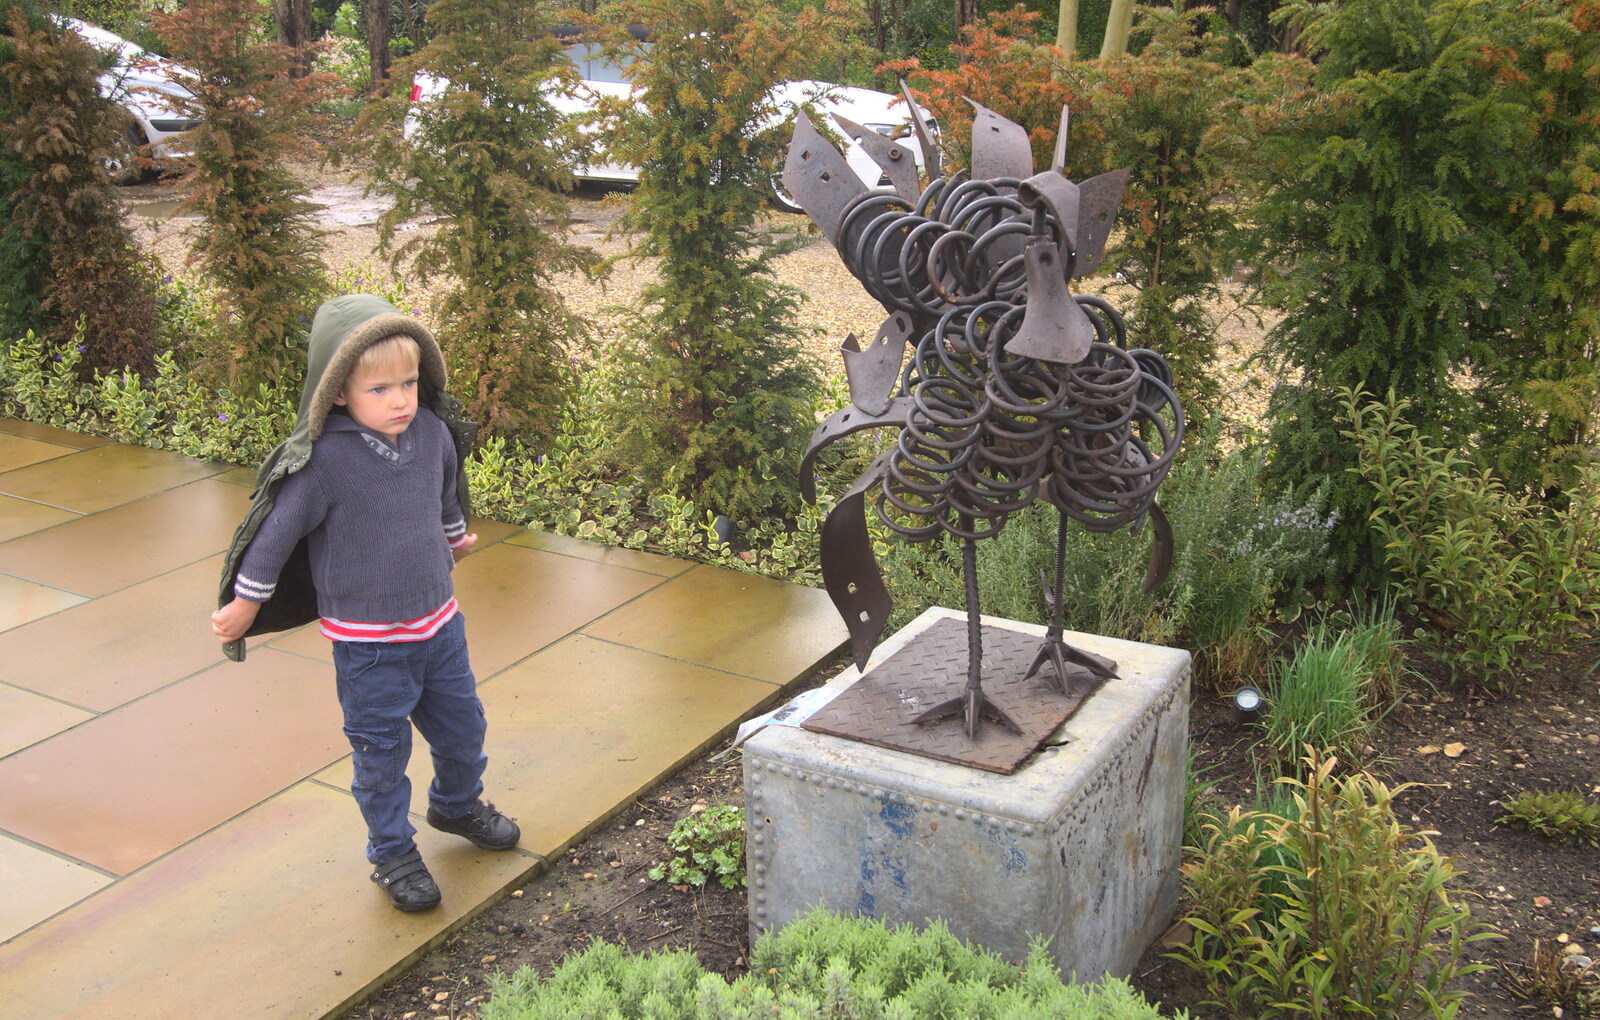 Harry inspects a statue from Harry's Pirate Party, The Oaksmere, Brome, Suffolk - 16th April 2016